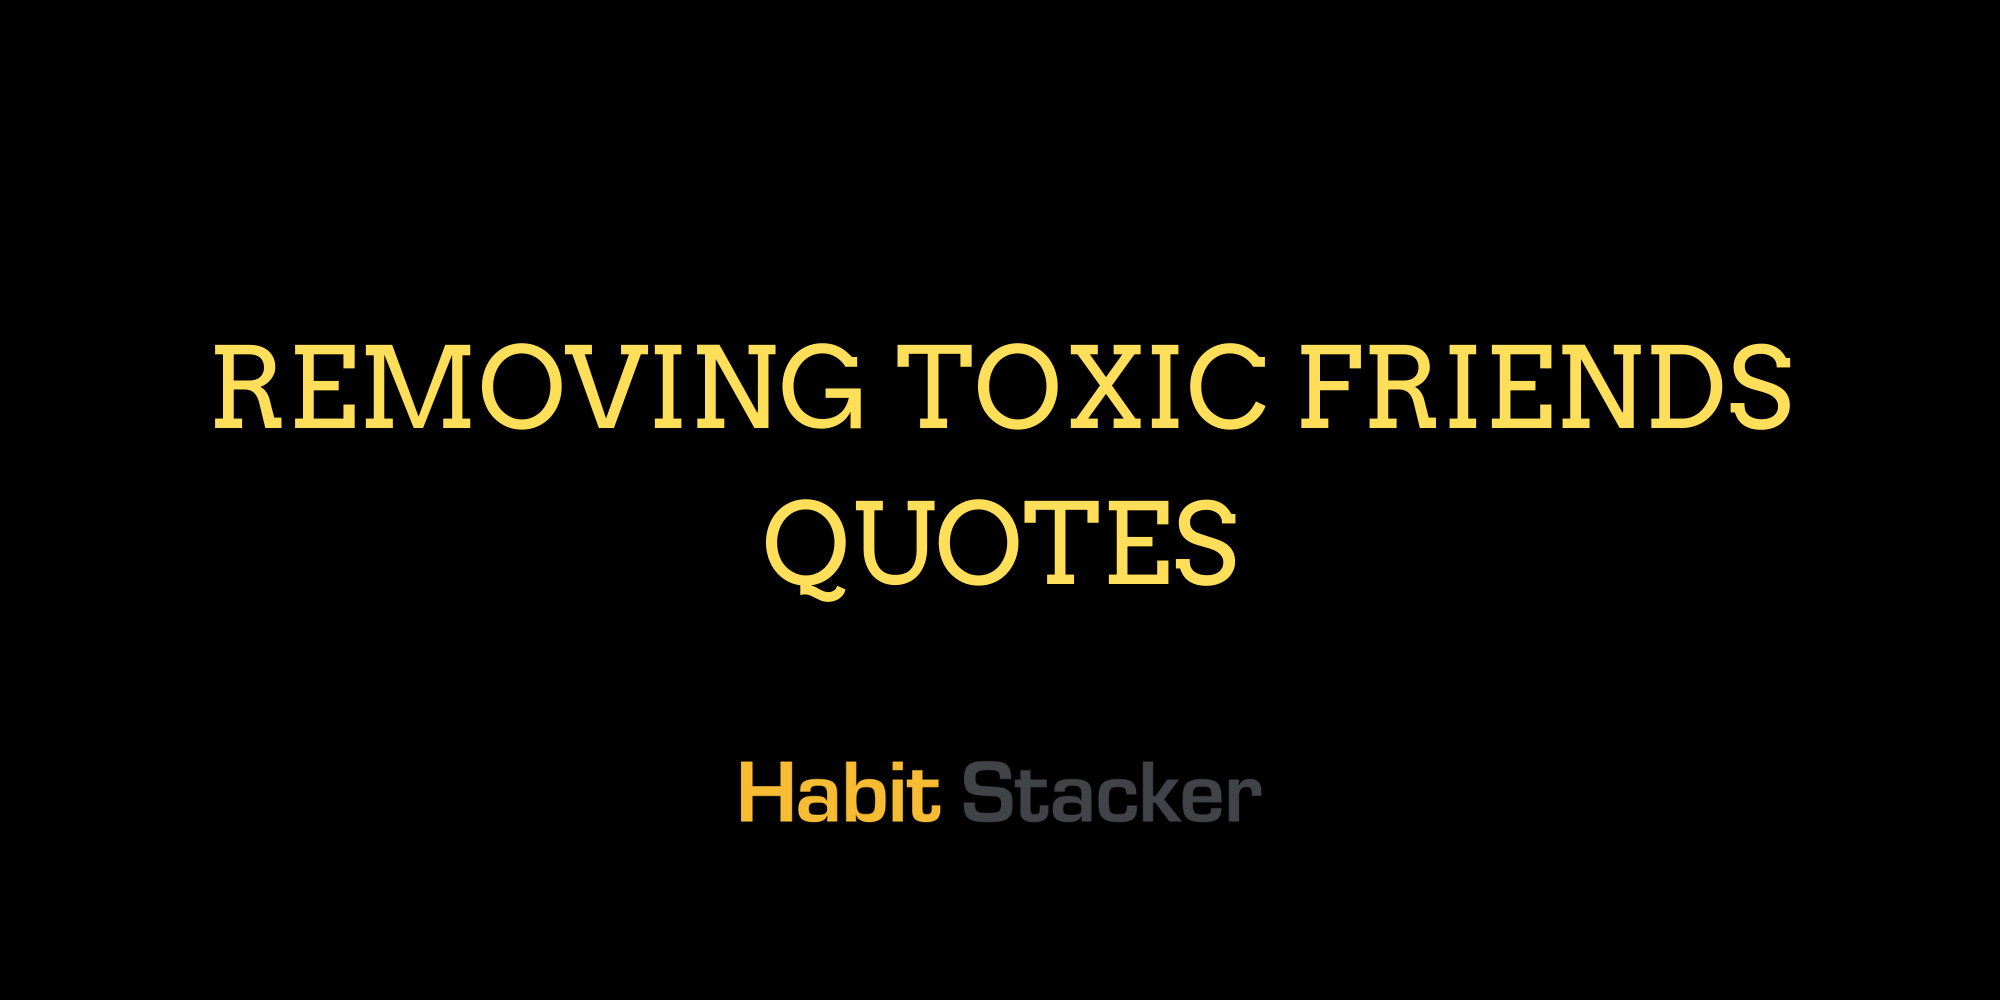 Download 40 Removing Toxic Friends Quotes | Habit Stacker